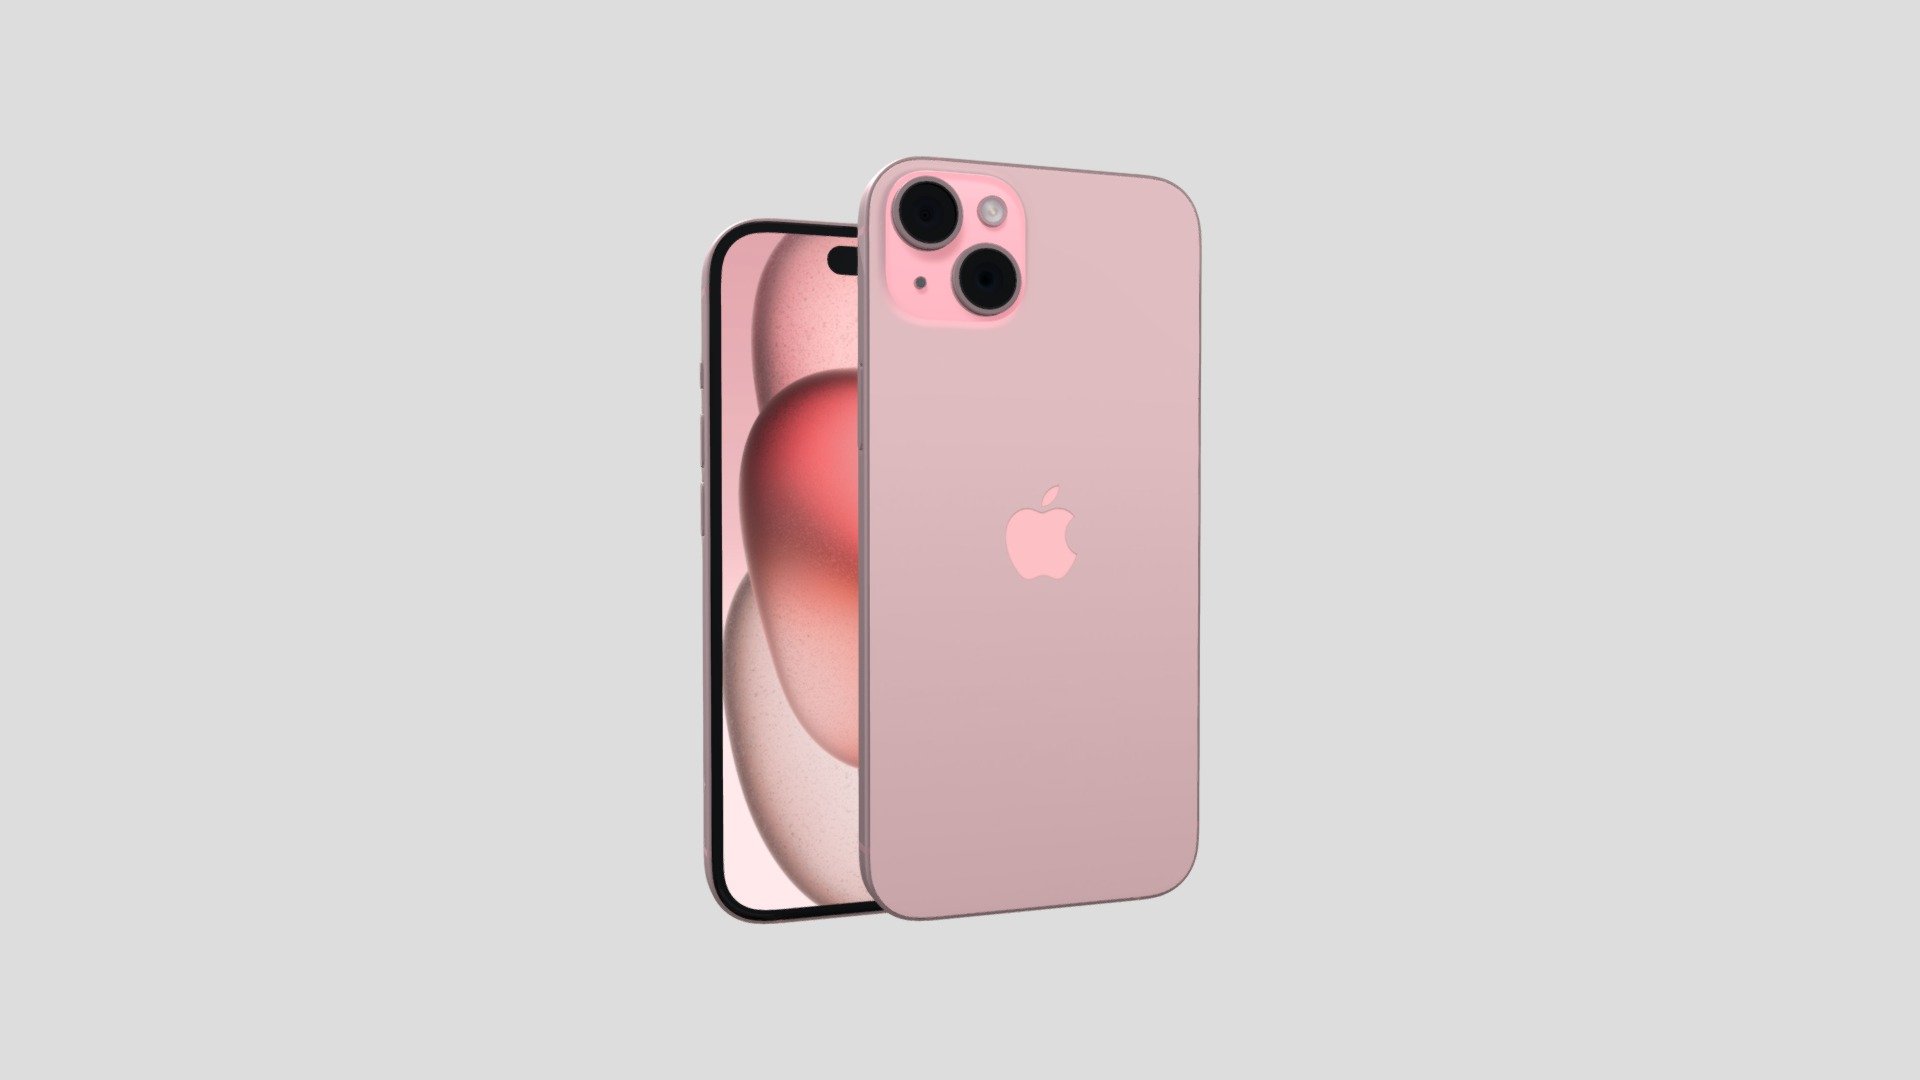 Iphone_15_plus&amp;&amp;&amp;iphone_15_pink, this model contains 3D model data as well as textures and their corresponding environments 3d model